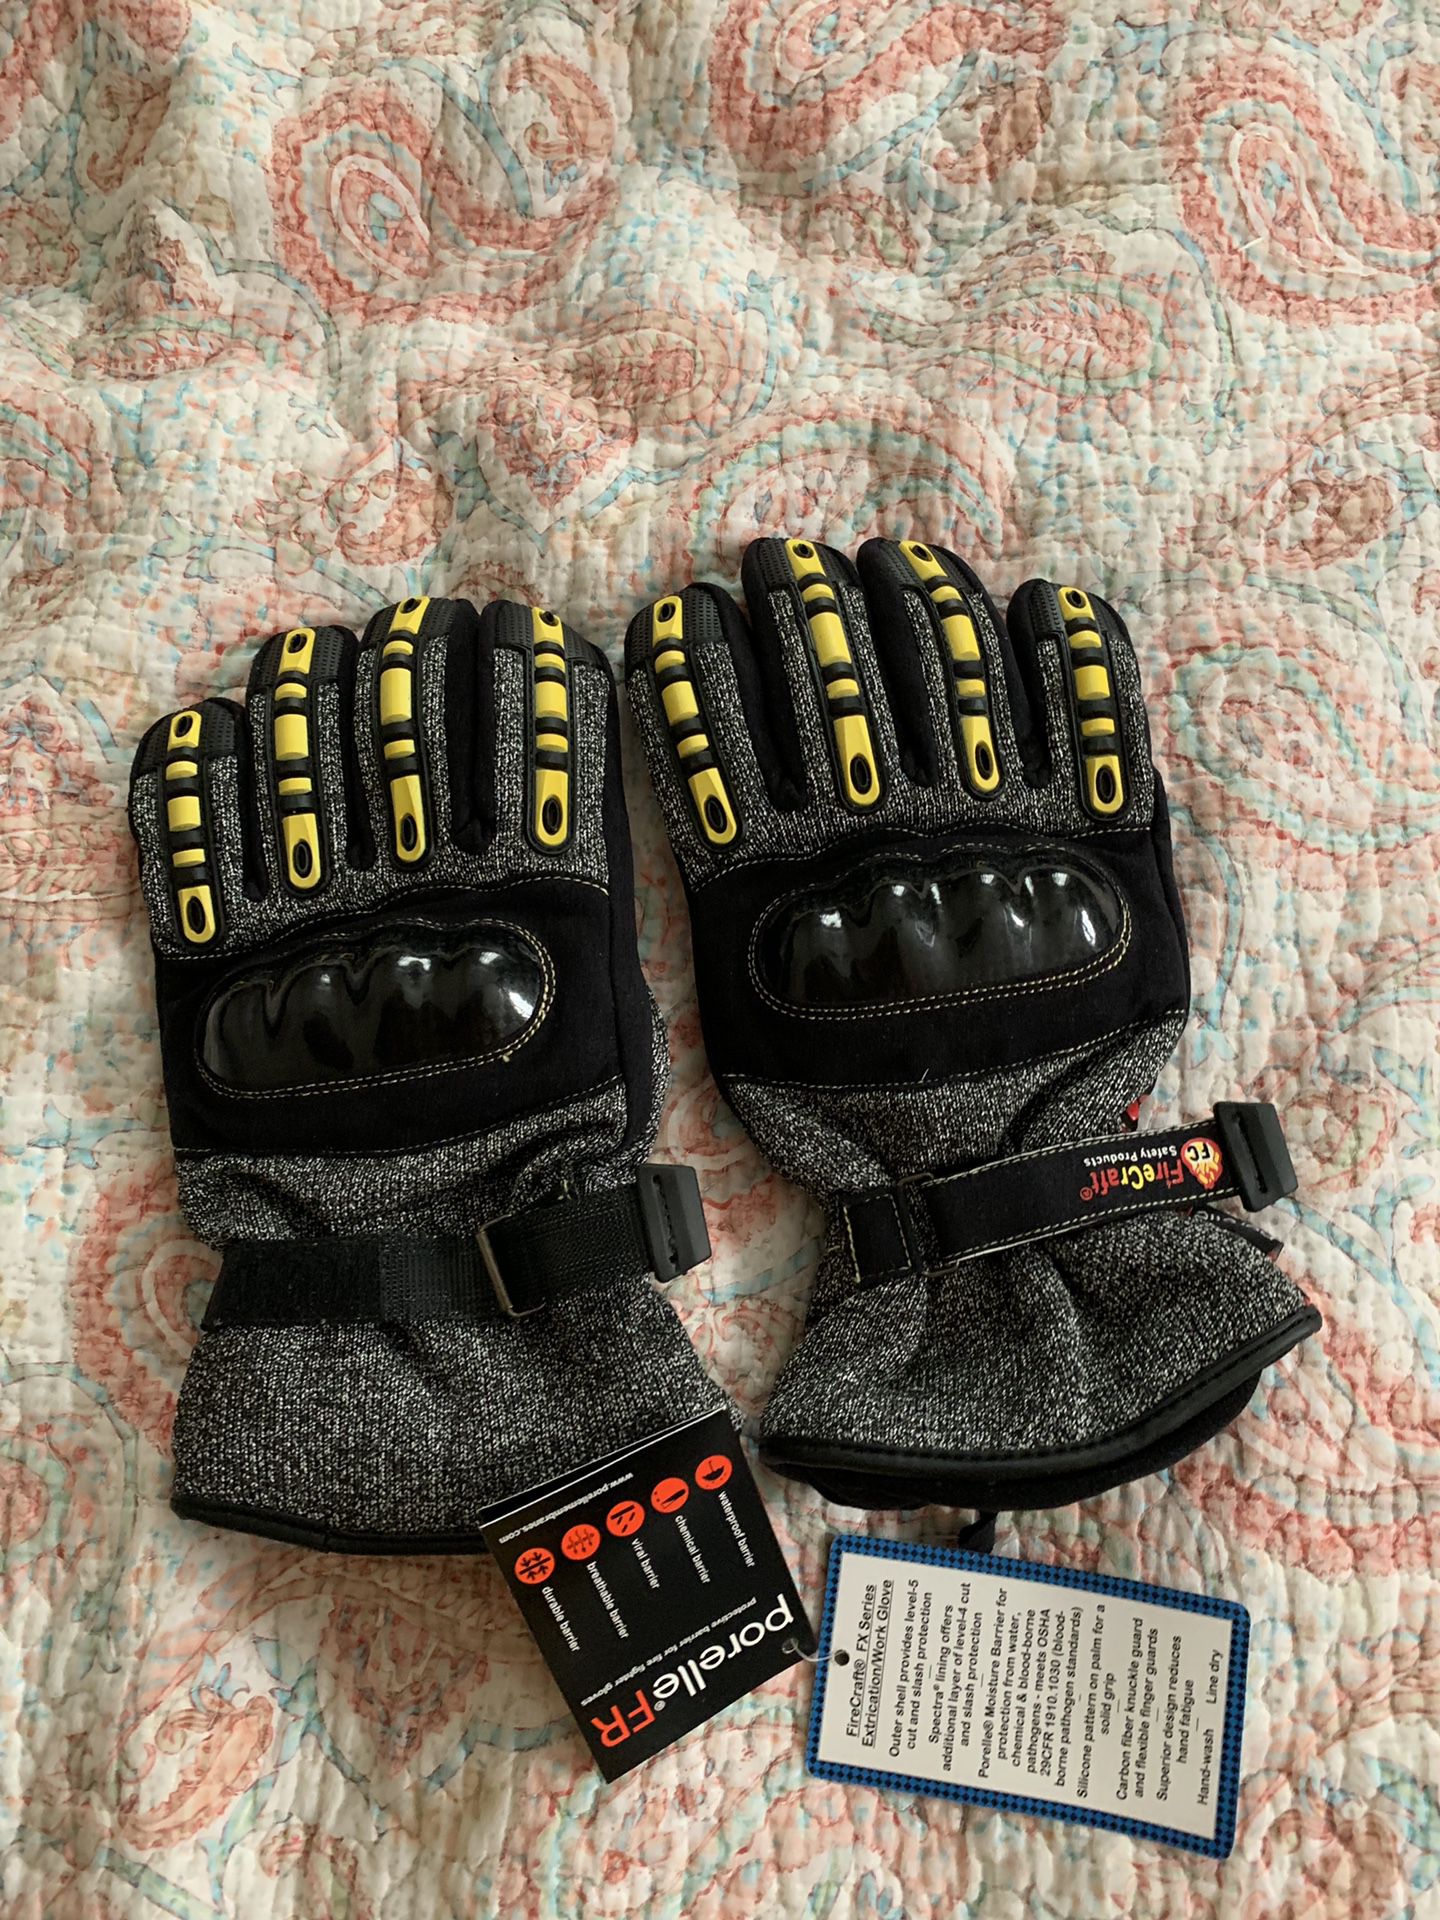 New fire extrications gloves fire craft